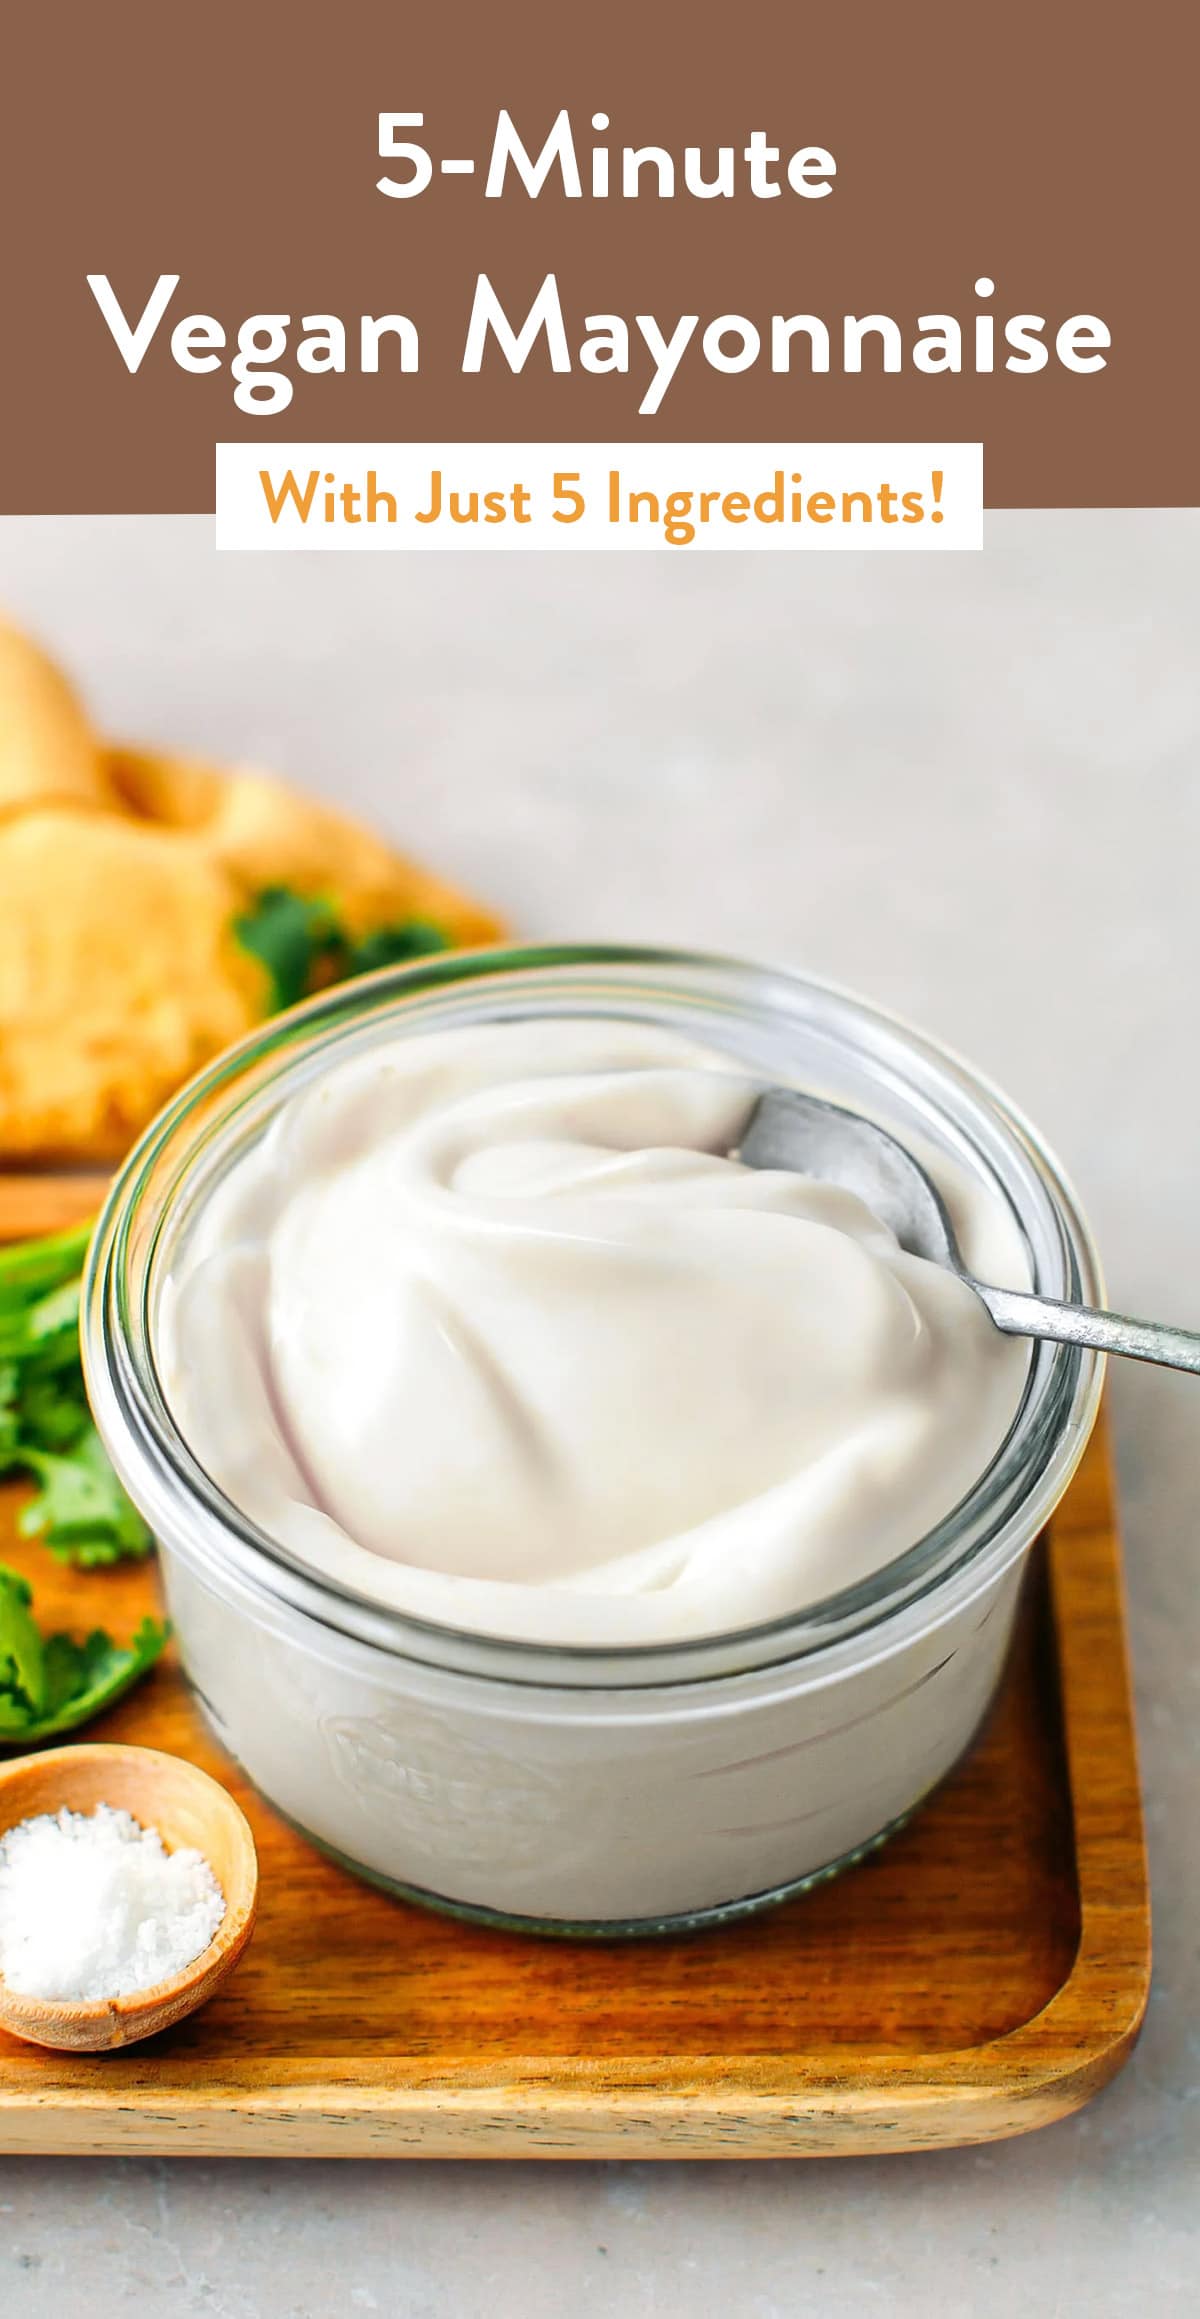 Delicious and creamy vegan mayo that tastes like the real thing! Just 5 ingredients and 5 minutes required. Use in sandwiches, salads, or as a base for sauces! #vegan #mayonnaise #plantbased #eggfree